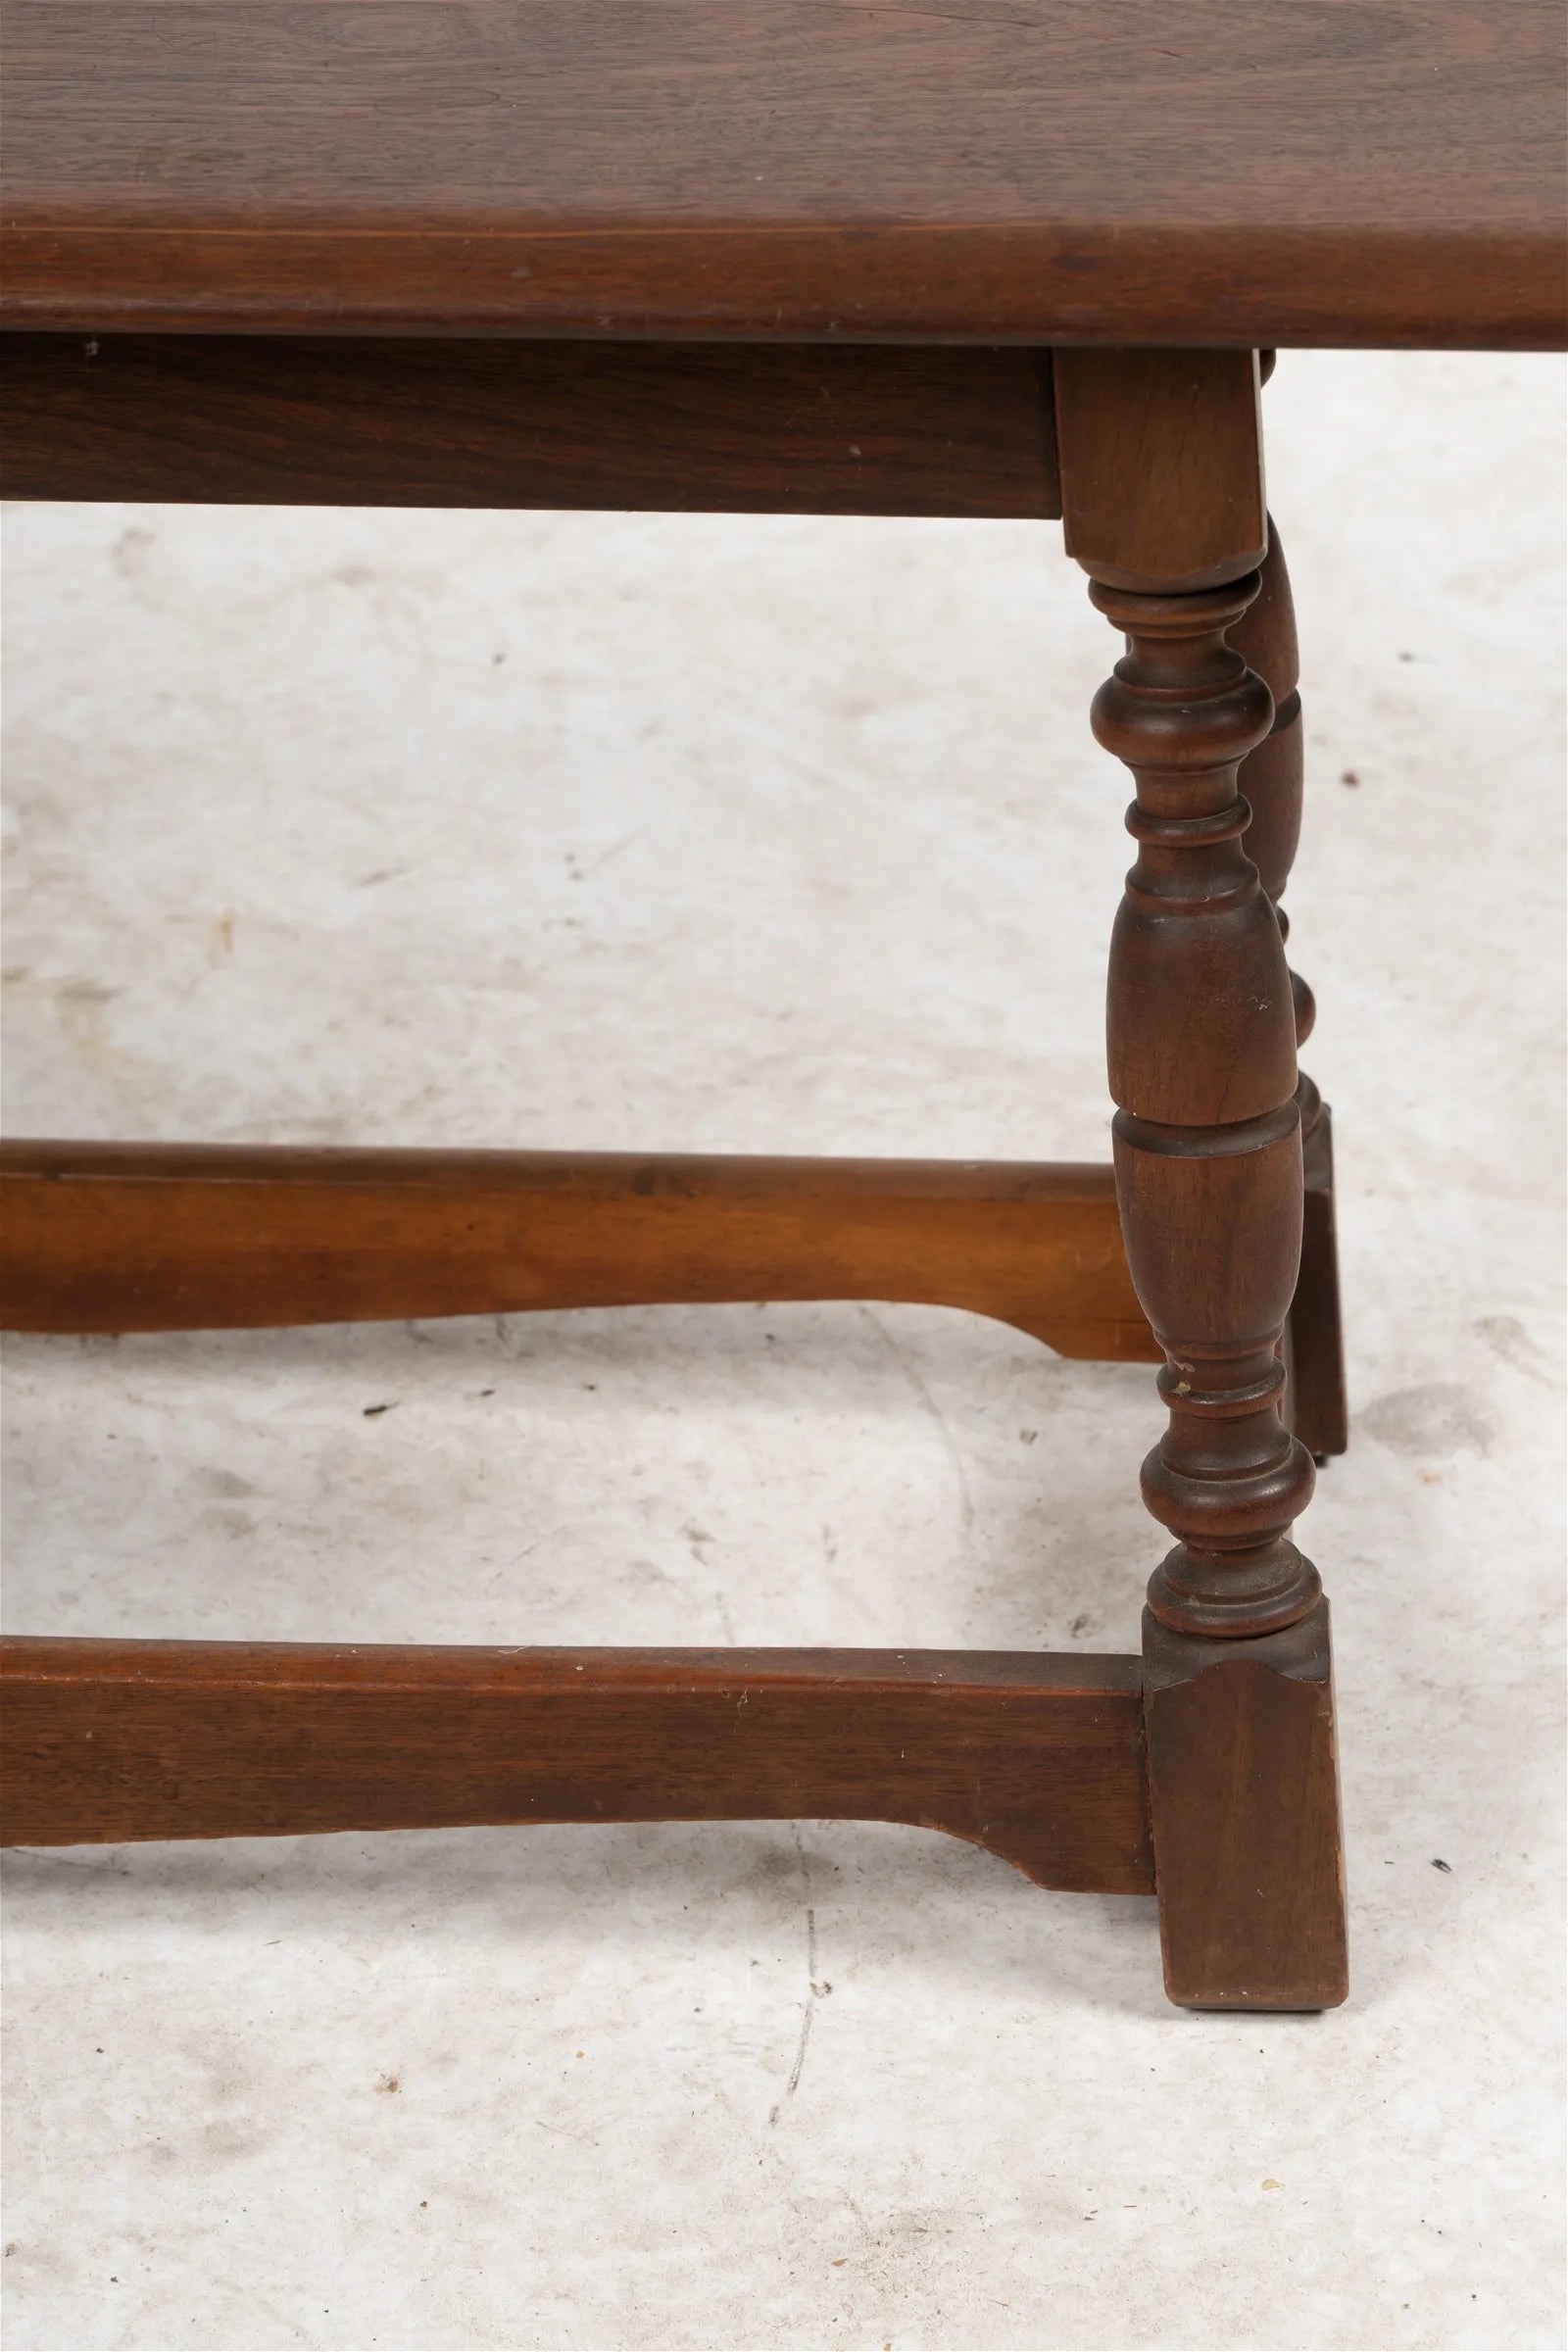 AF2-419: Antique Early 20th Century American Walnut Colonial Style Bench with Turned Legs